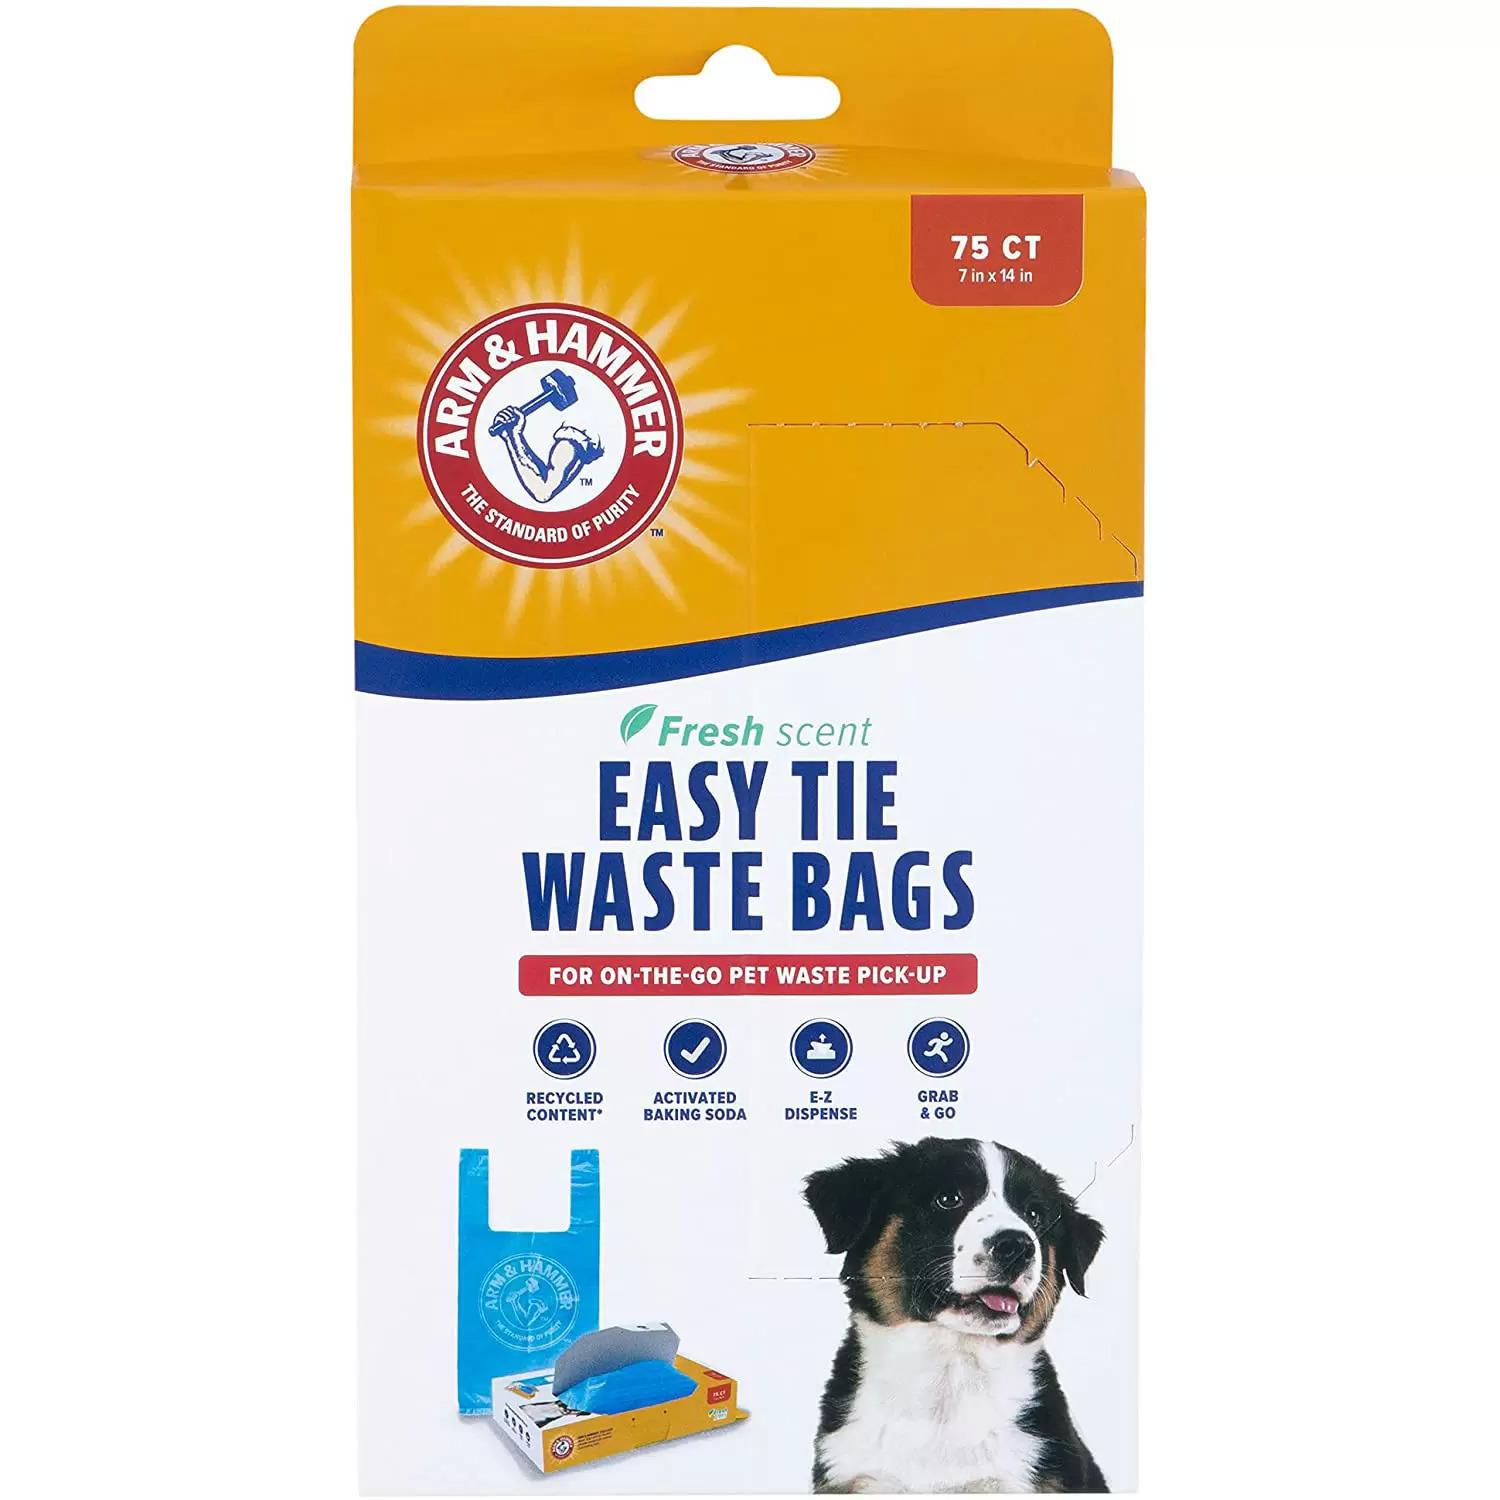 75 Arm and Hammer Easy Tie Waste Bags for $2.80 Shipped